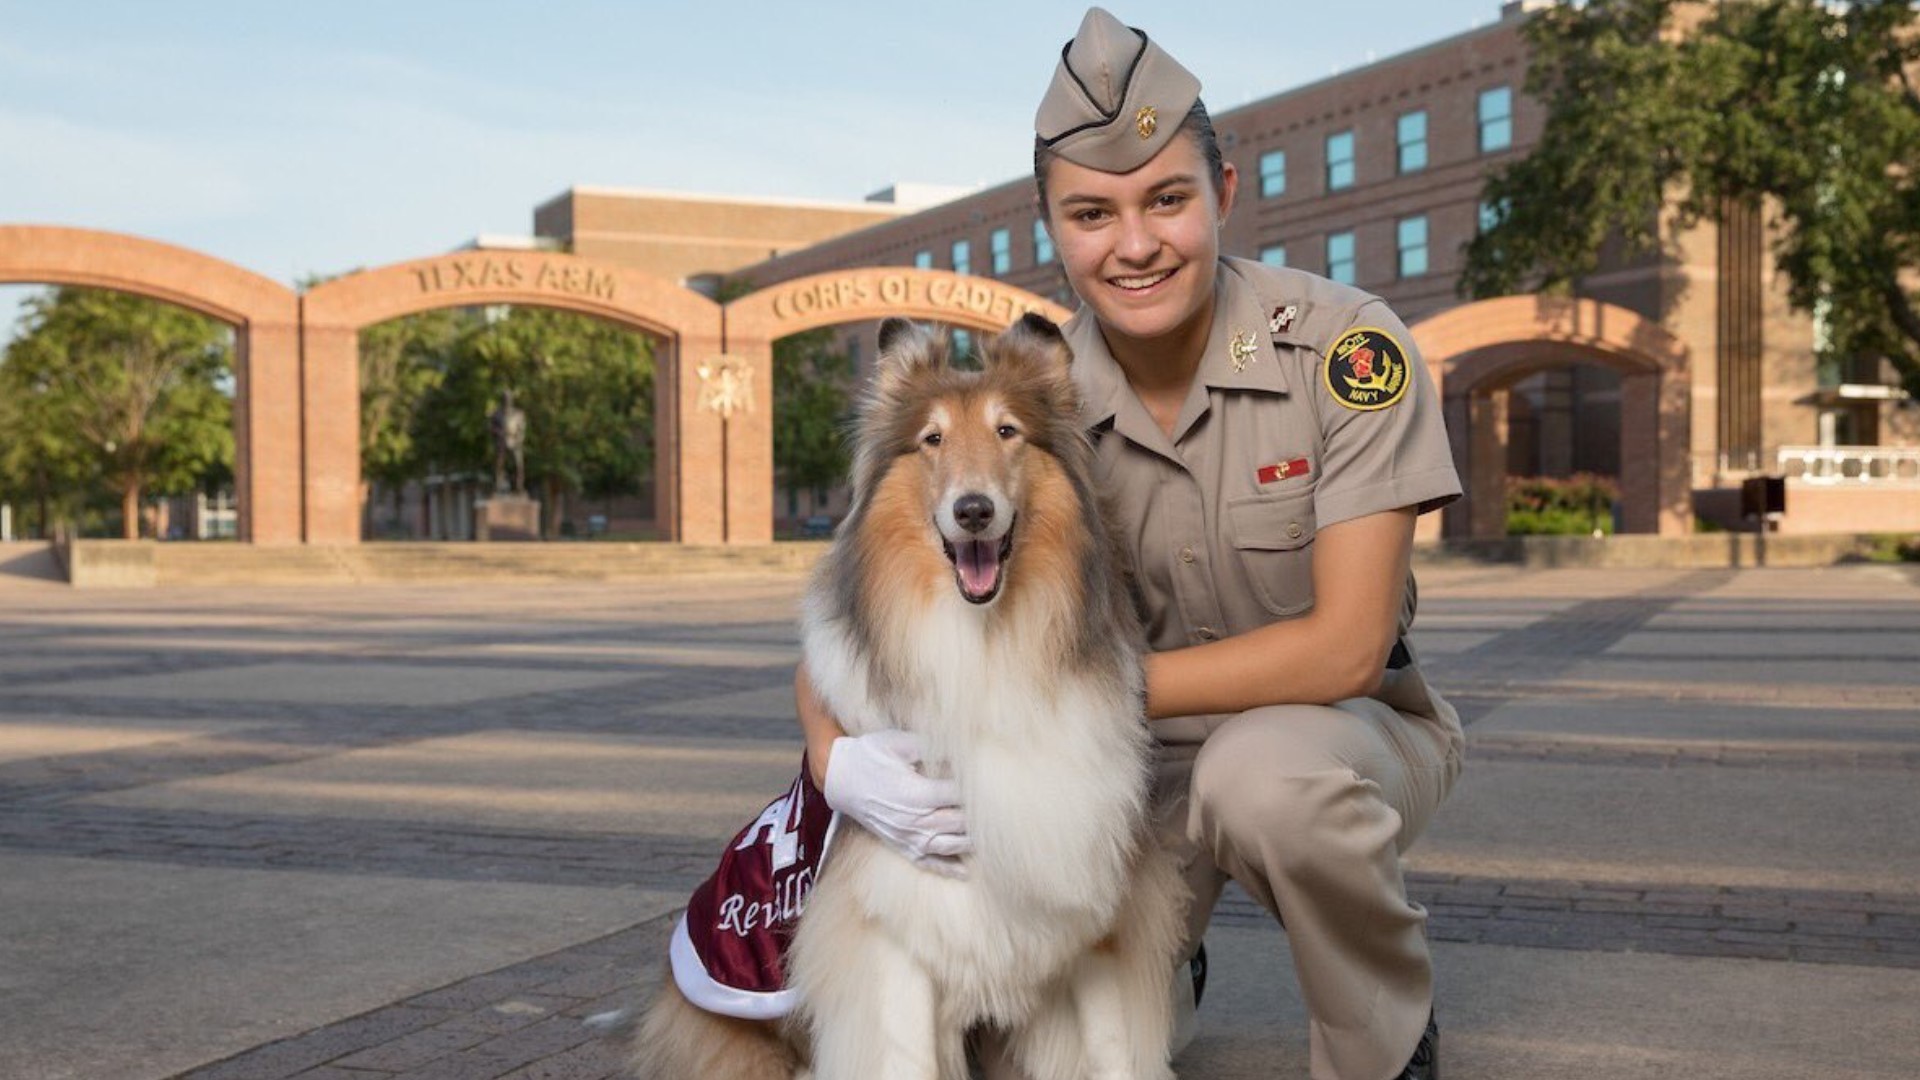 Although Reveille is known as the "First Lady of Aggieland," Mia Miller is the first woman in Texas A&M University's history to be her primary handler.